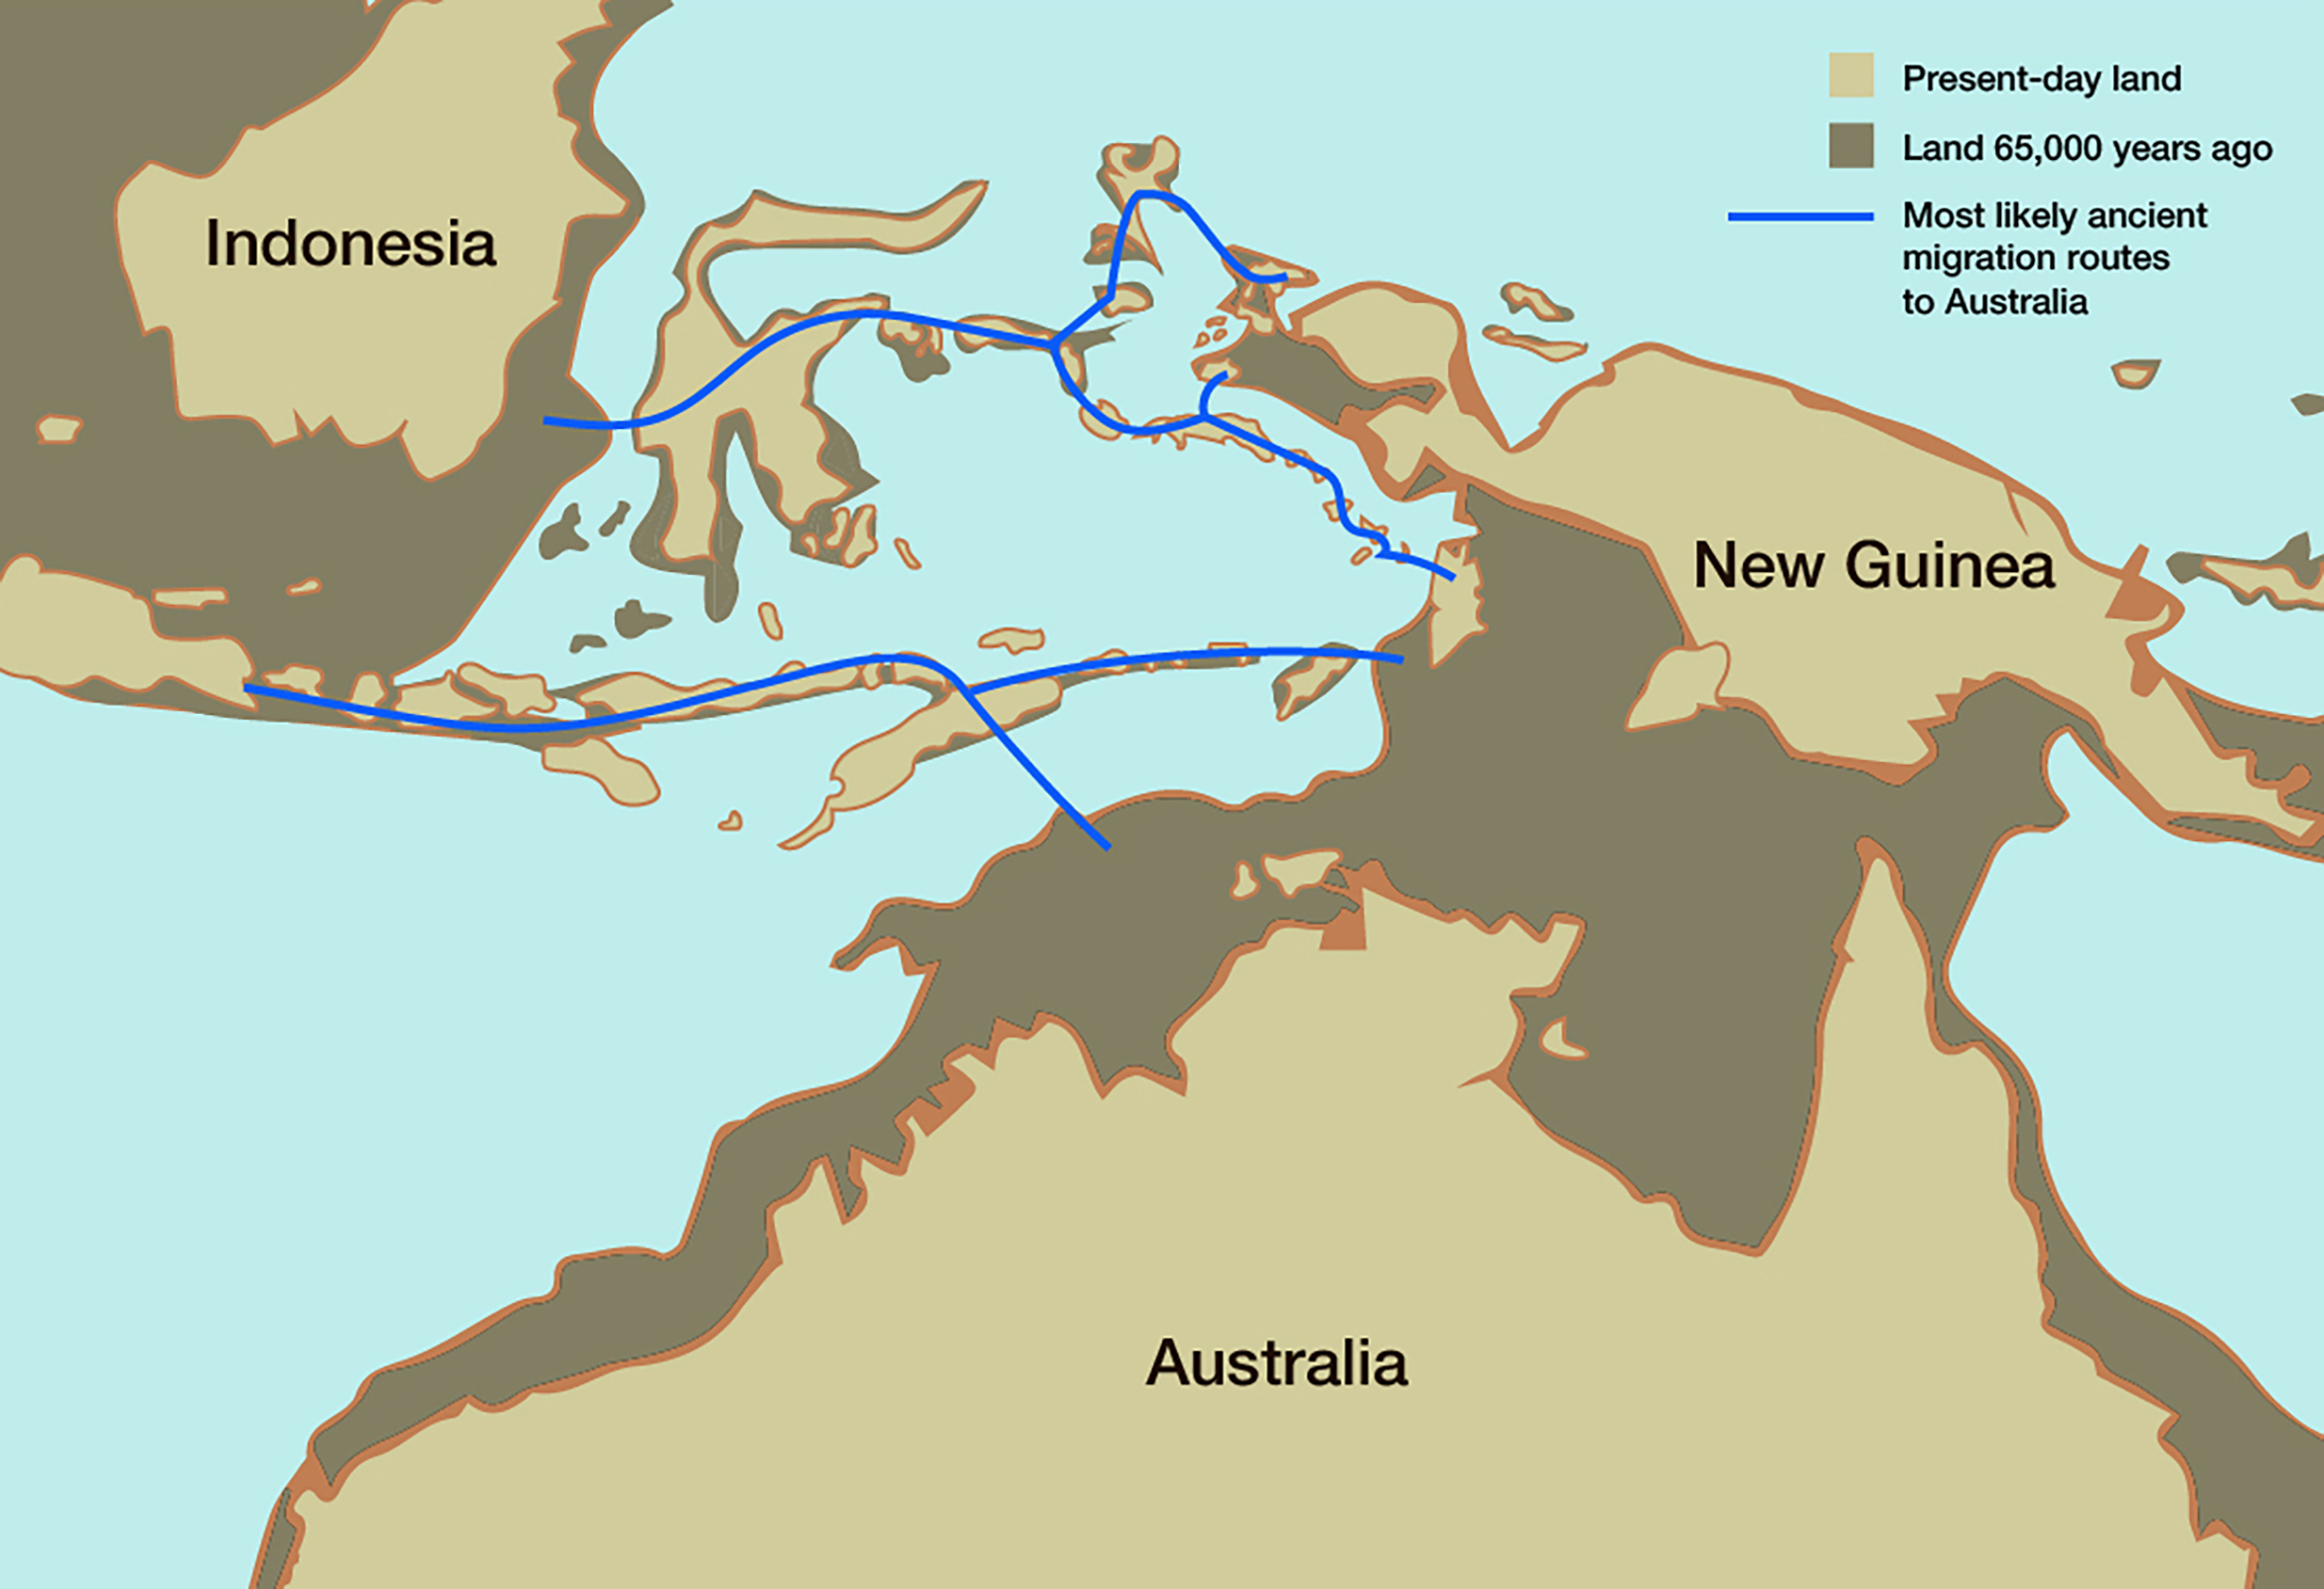 Map C: Most likely ancient migration routes to Australia